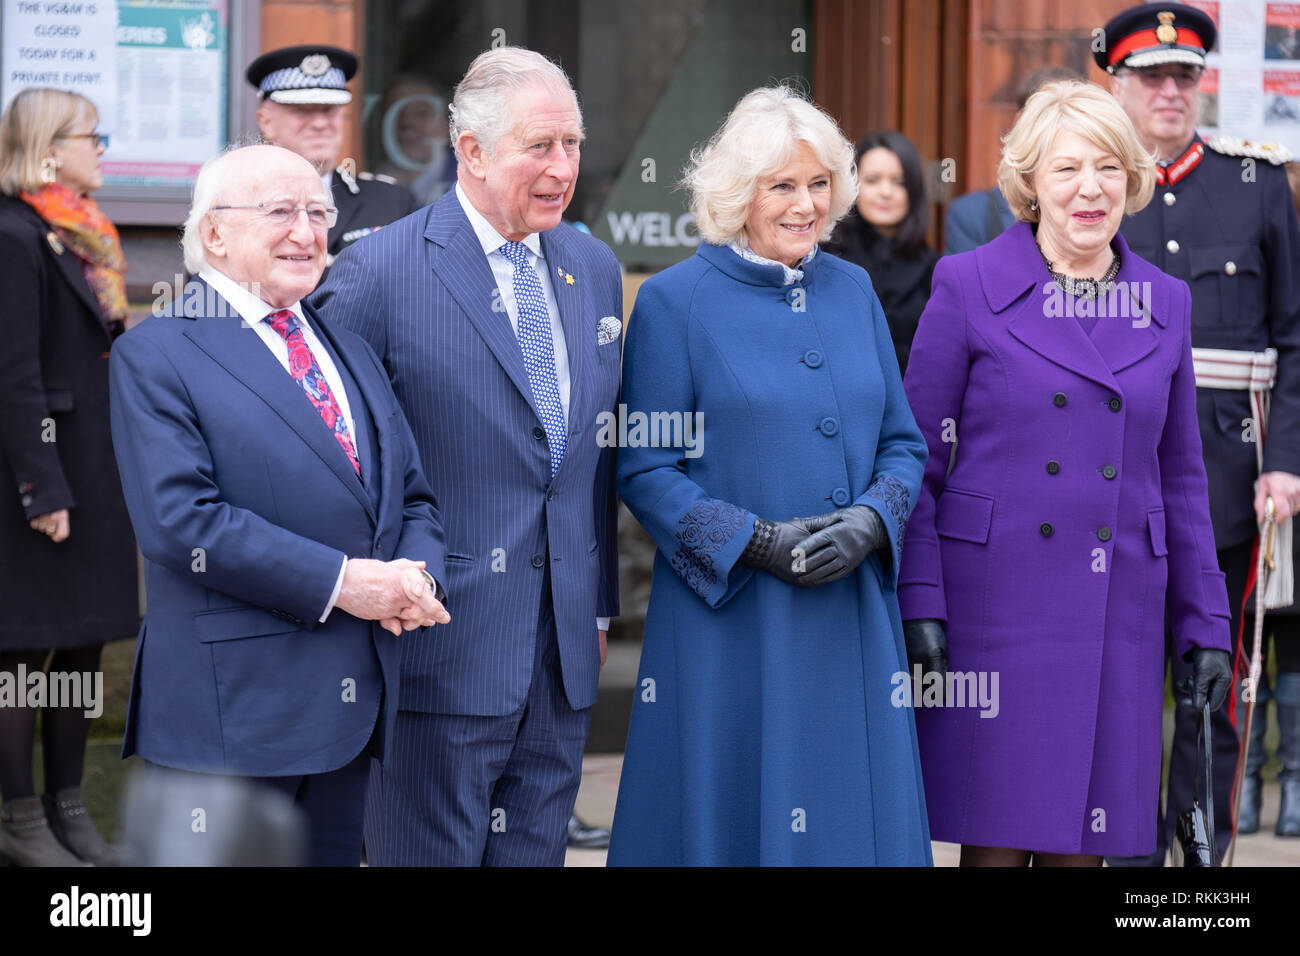 liverpool-uk-12th-feb-2019-the-prince-of-wales-and-the-duchess-of-cornwall-arriving-for-a-reception-at-the-victoria-gallery-at-the-university-of-liverpool-during-their-visit-to-liverpool-on-tuesday-february-12-2019-together-with-the-president-of-ireland-michael-higgins-and-mrs-higgins-the-visit-was-to-celebrate-his-royal-highness-and-president-higginss-joint-patronage-of-the-liverpool-institute-of-irish-studies-credit-christopher-middletonalamy-live-news-RKK3HH.jpg